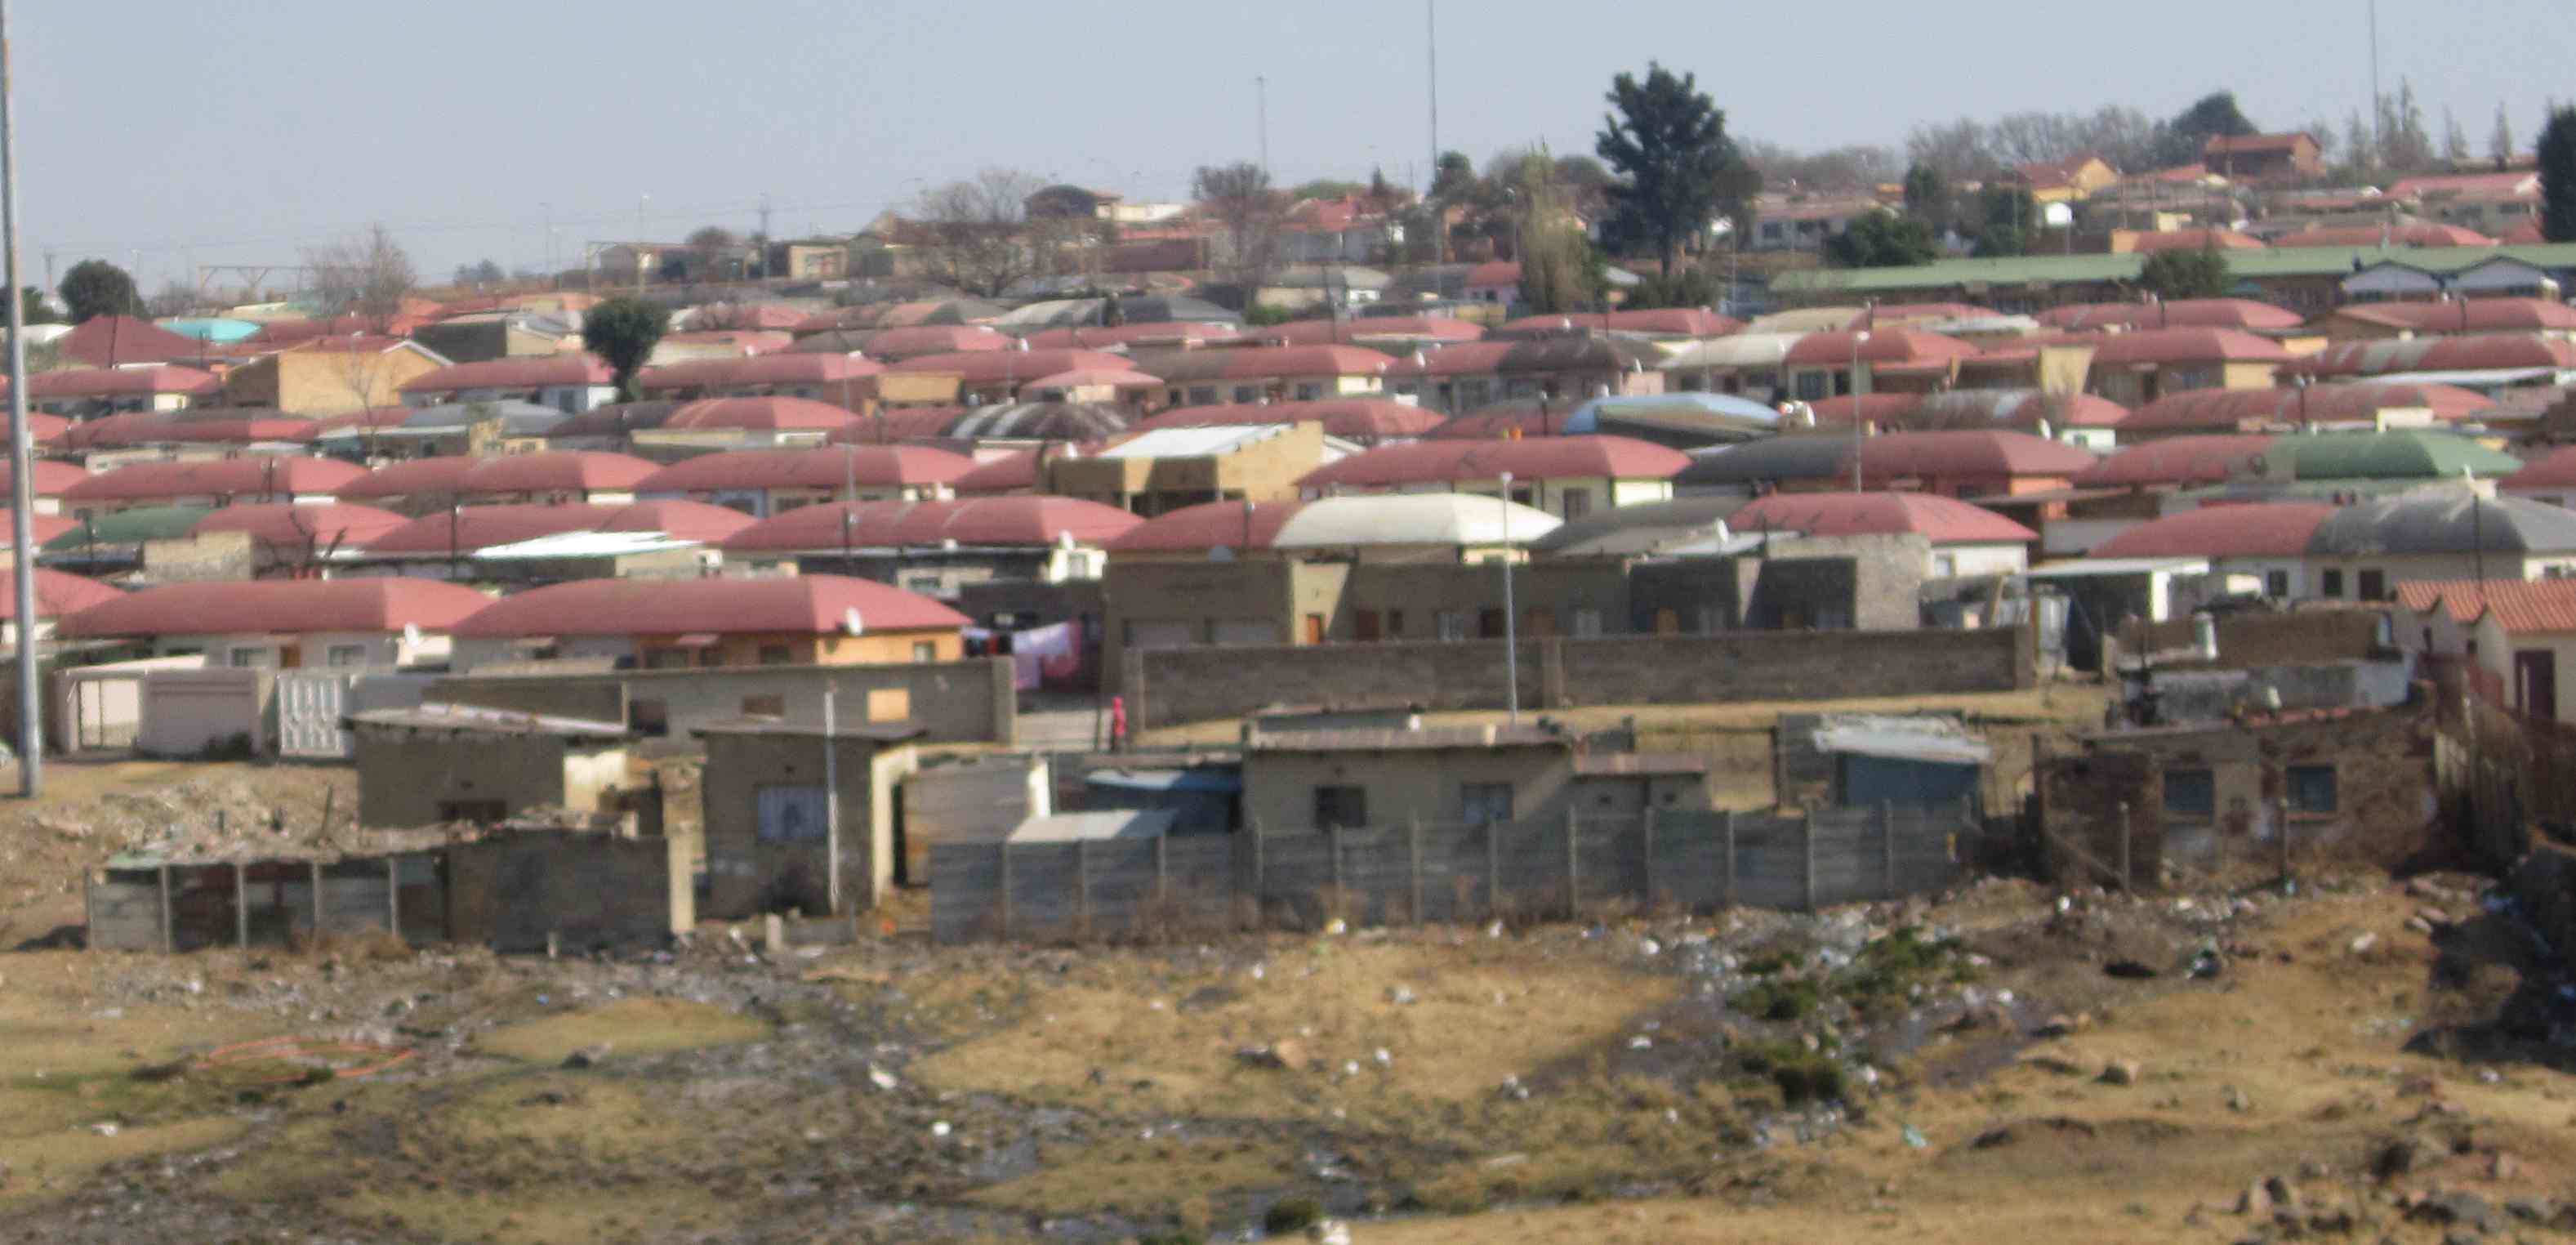 South African Youths Demand Better Housing For Poor -- Or An Uprising